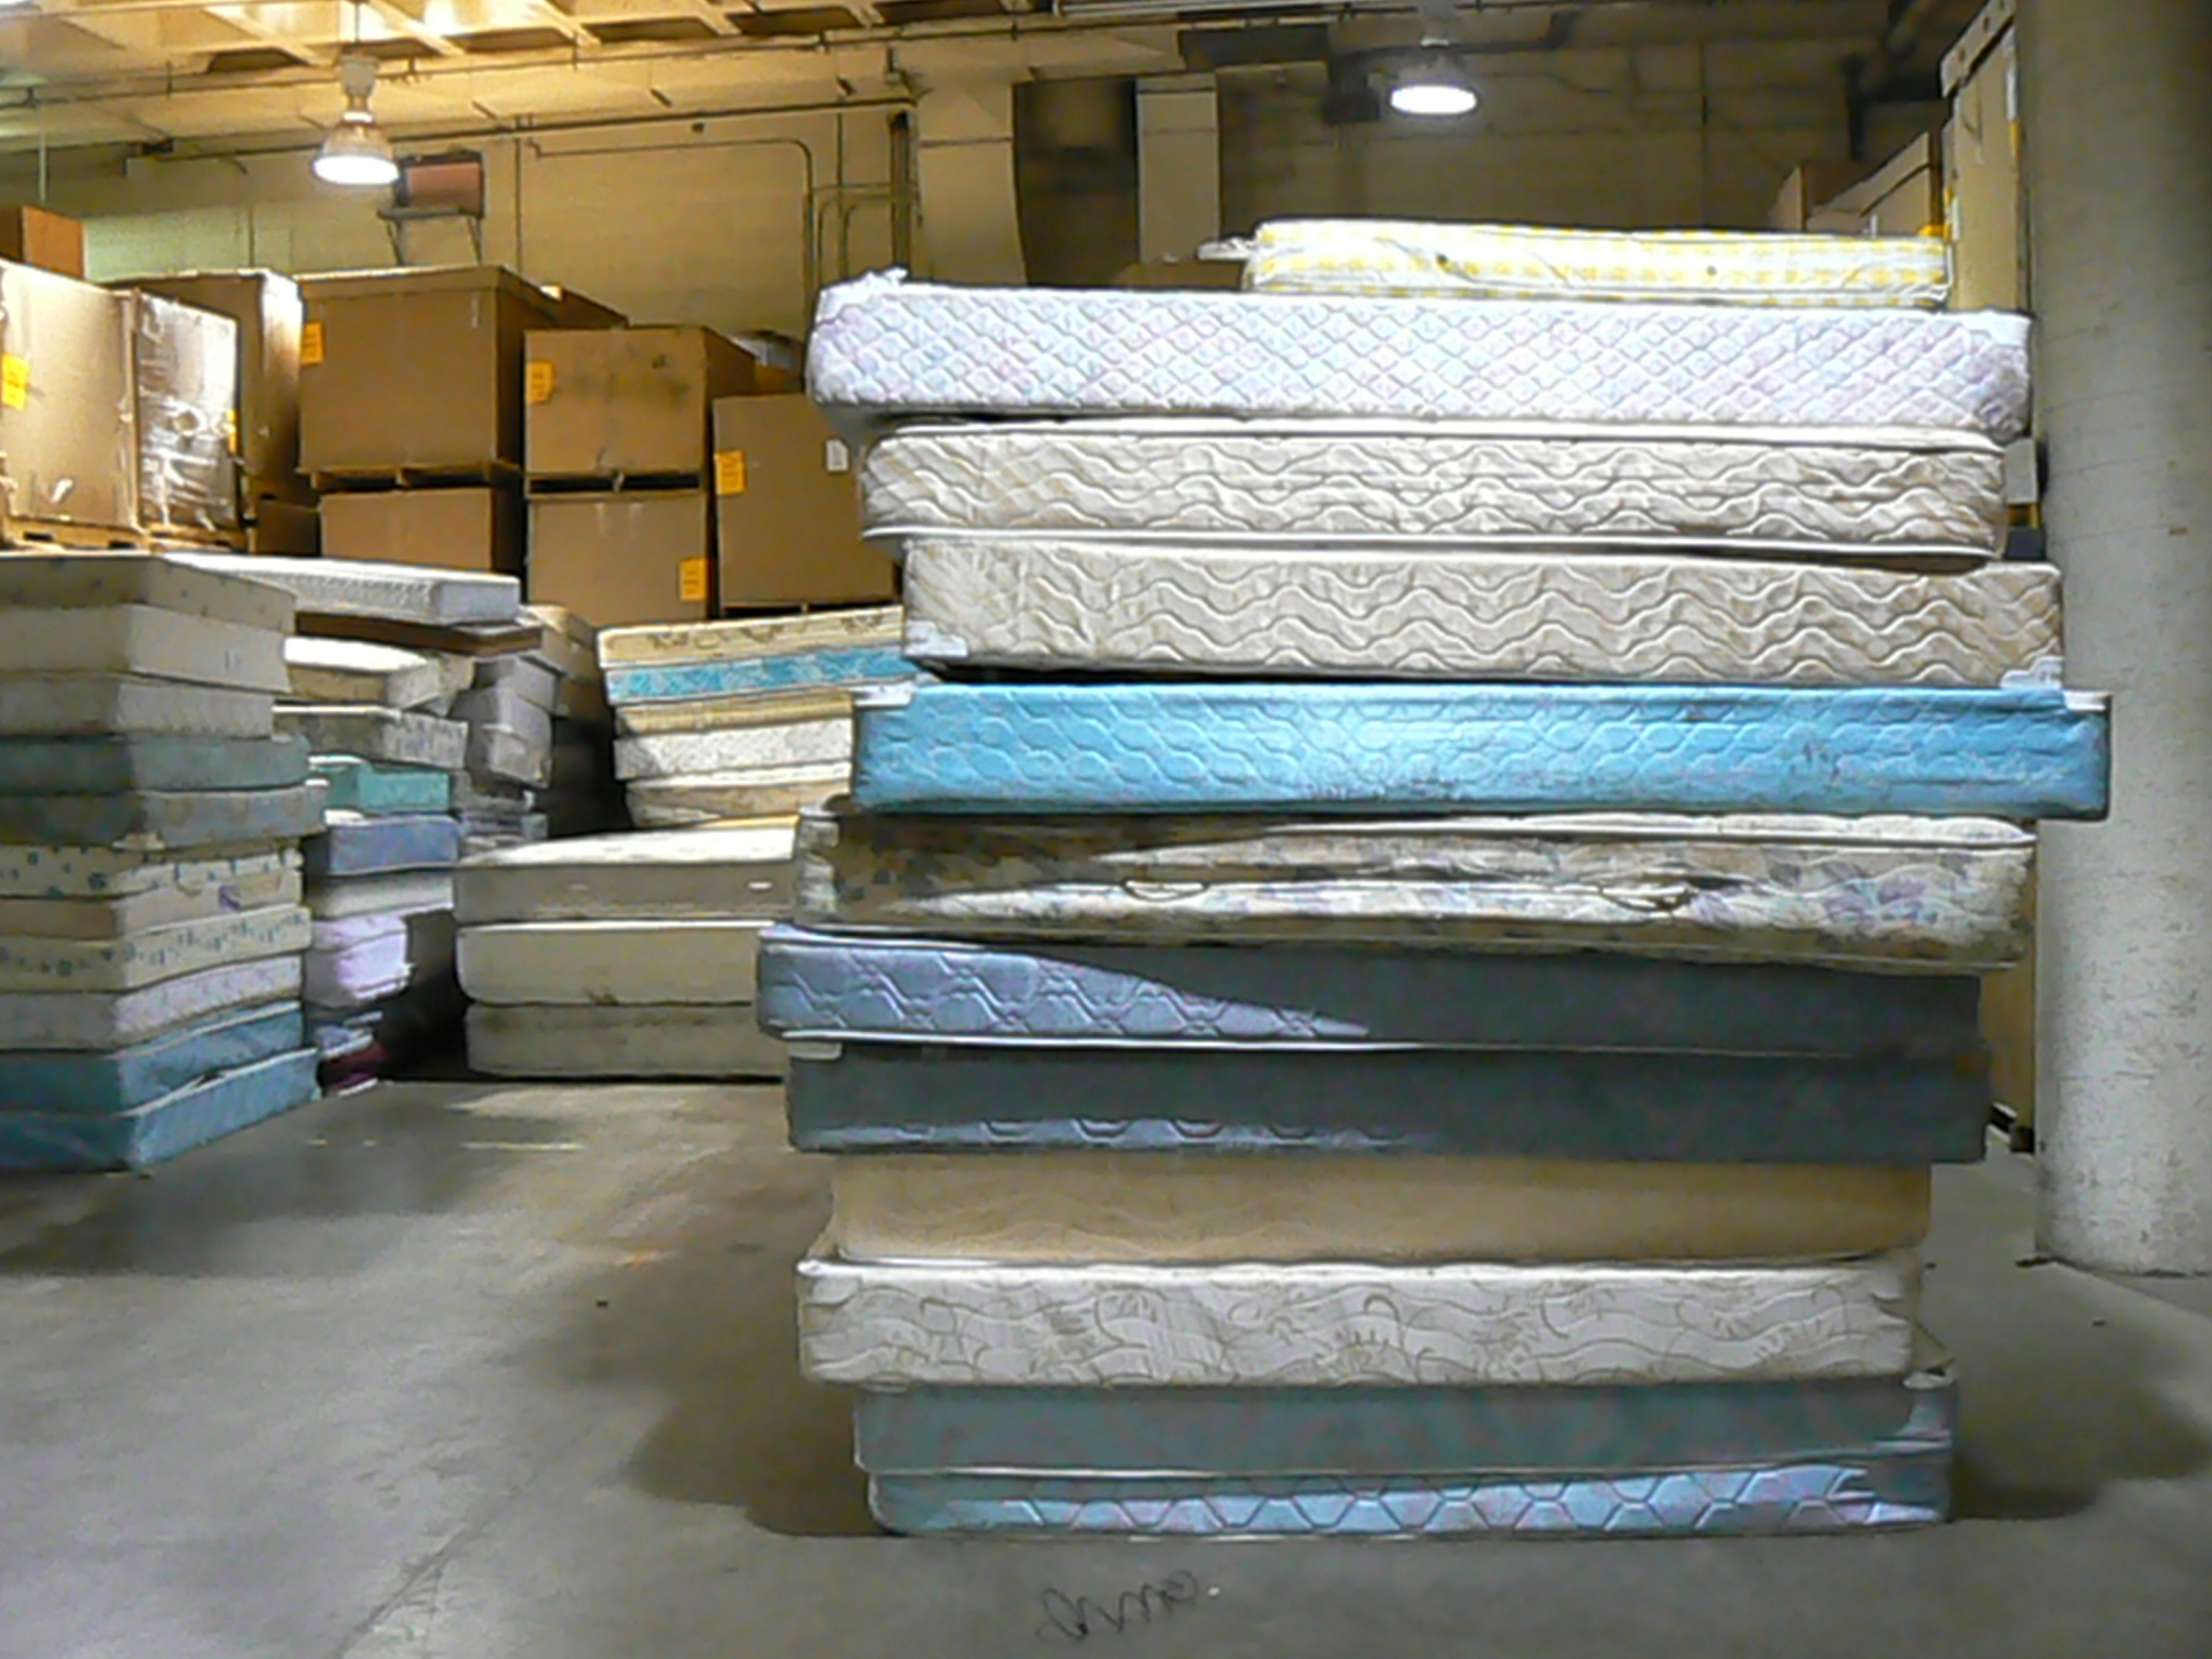 can used mattresses be sold in minnesota